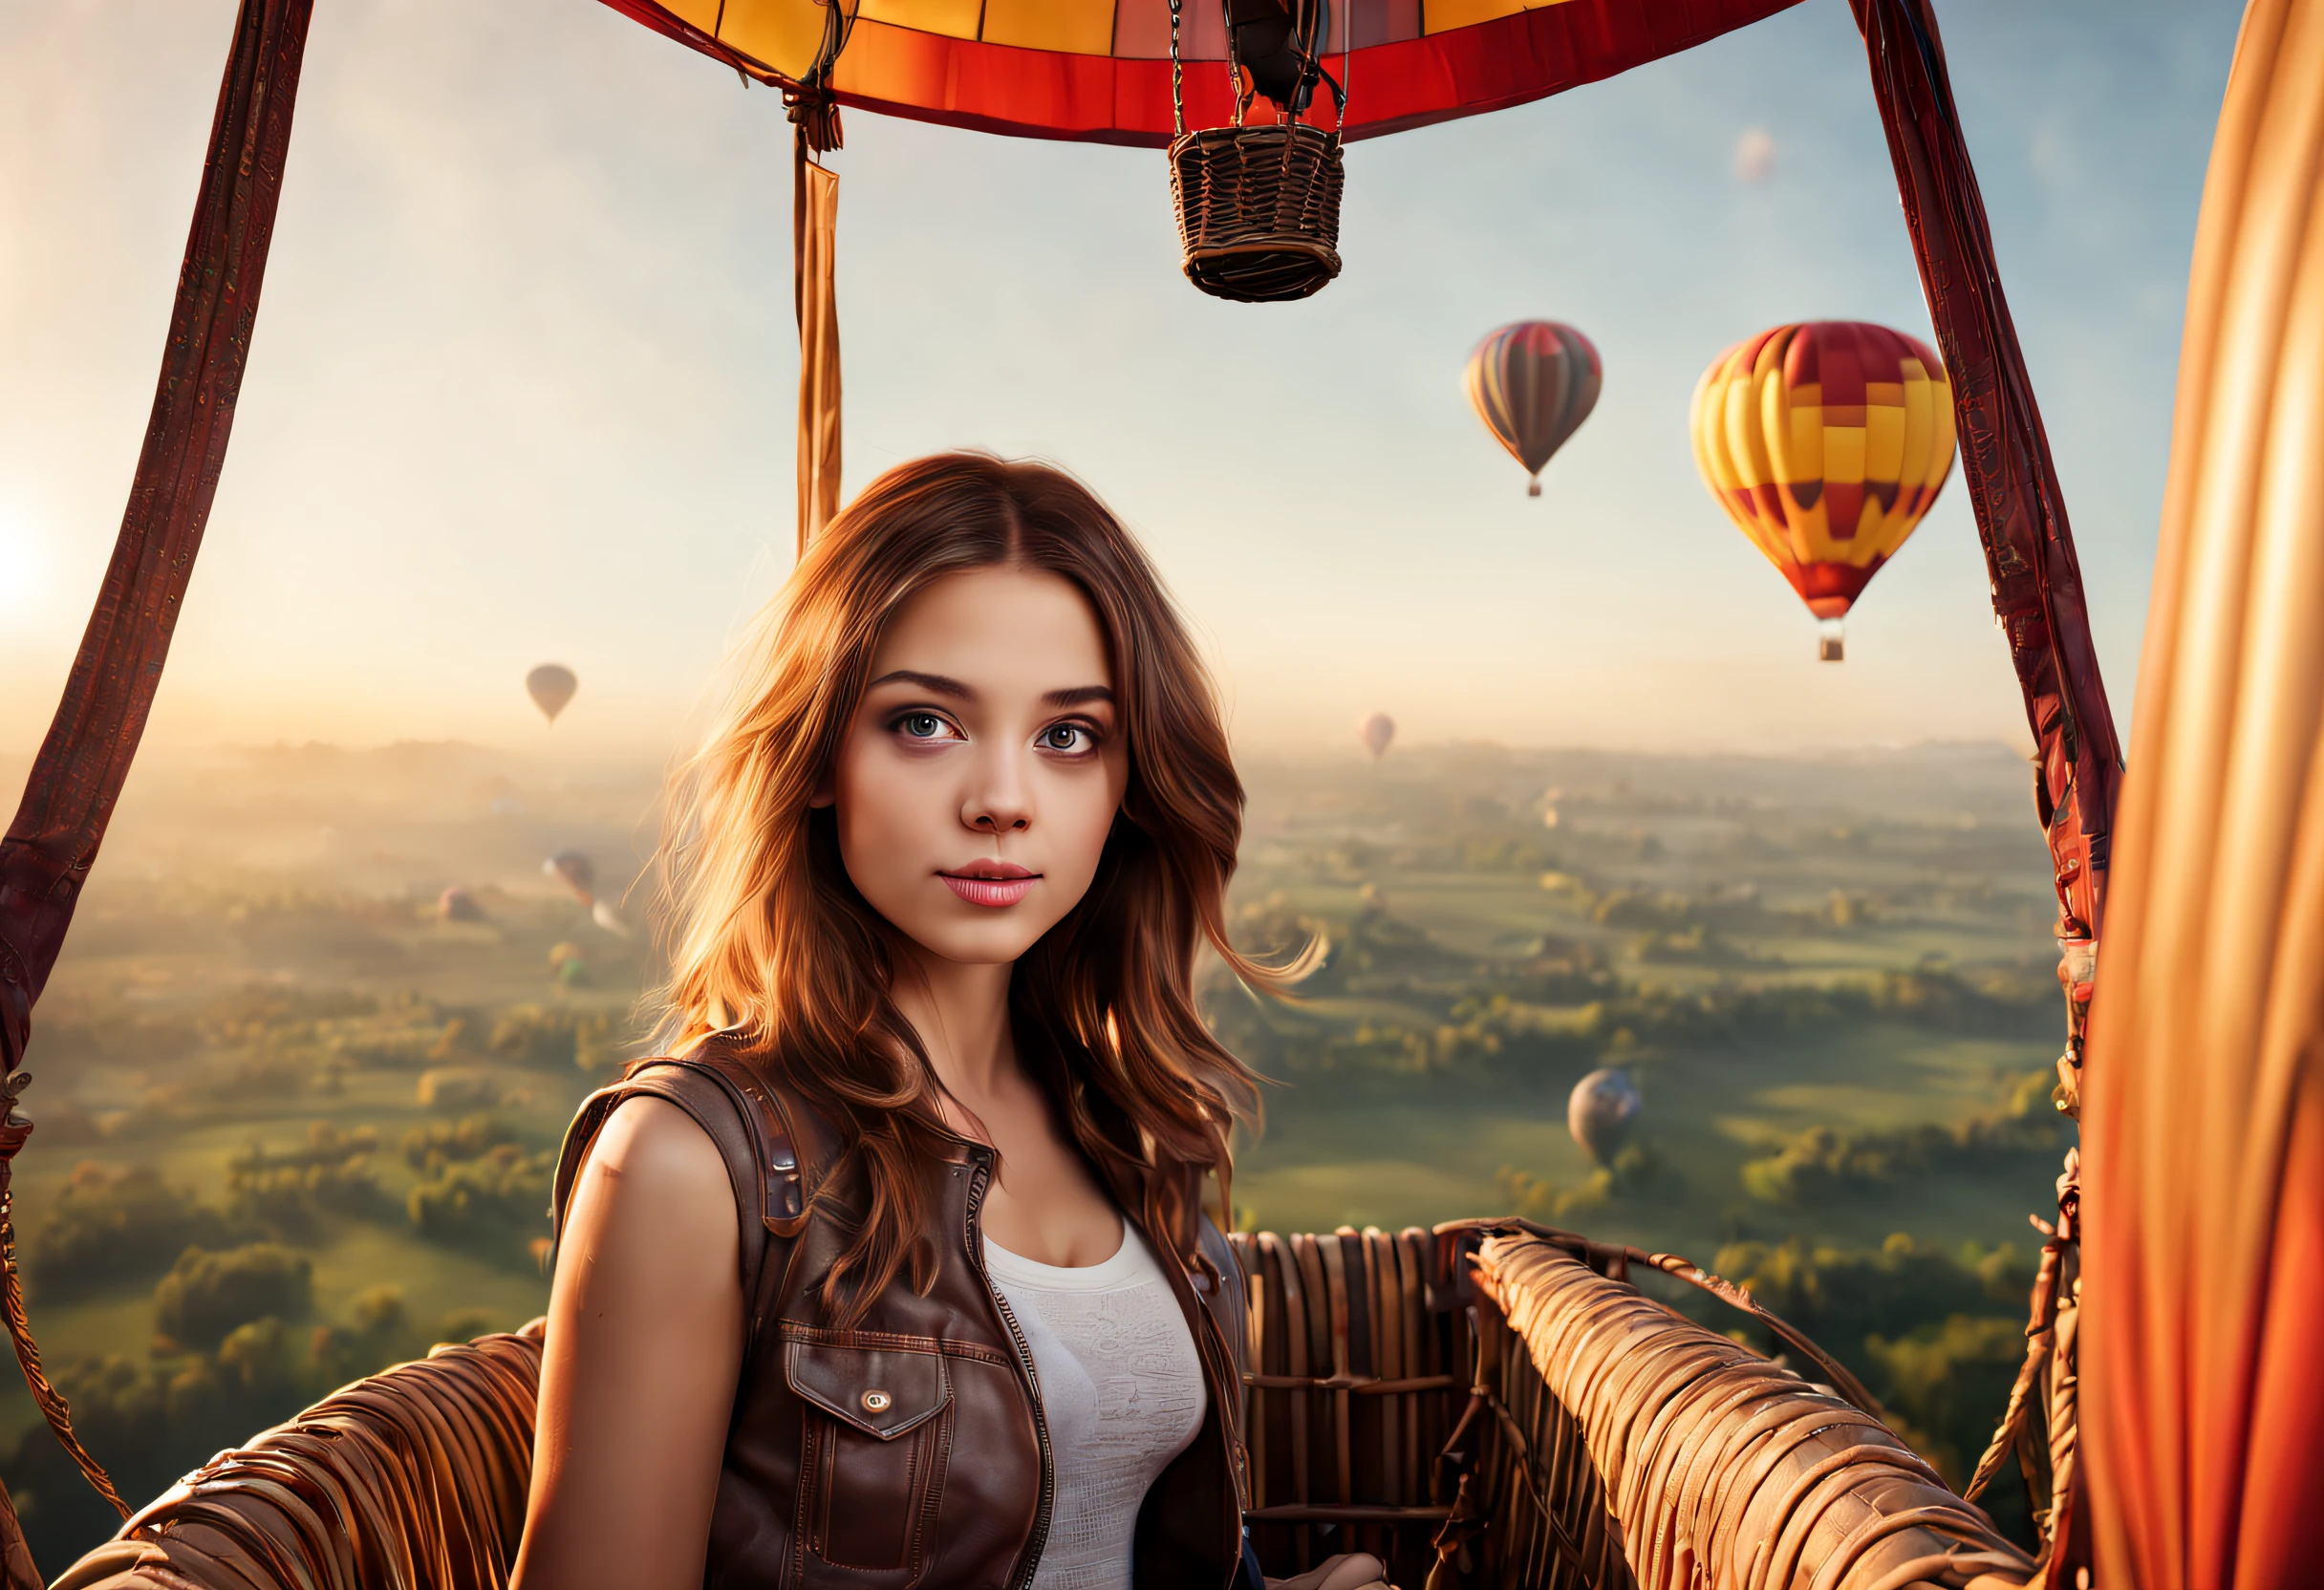 (best quality, 4k, 8k, high resolution, masterpiece: 1.2), ultra detailed, (realistic, photorealistic, photorealistic: 1.37), (a beautiful girl inside a hot air balloon: 1.32), high resolution, intricate details, lighting magical Professional photography in wide angle format to capture the entire scene.